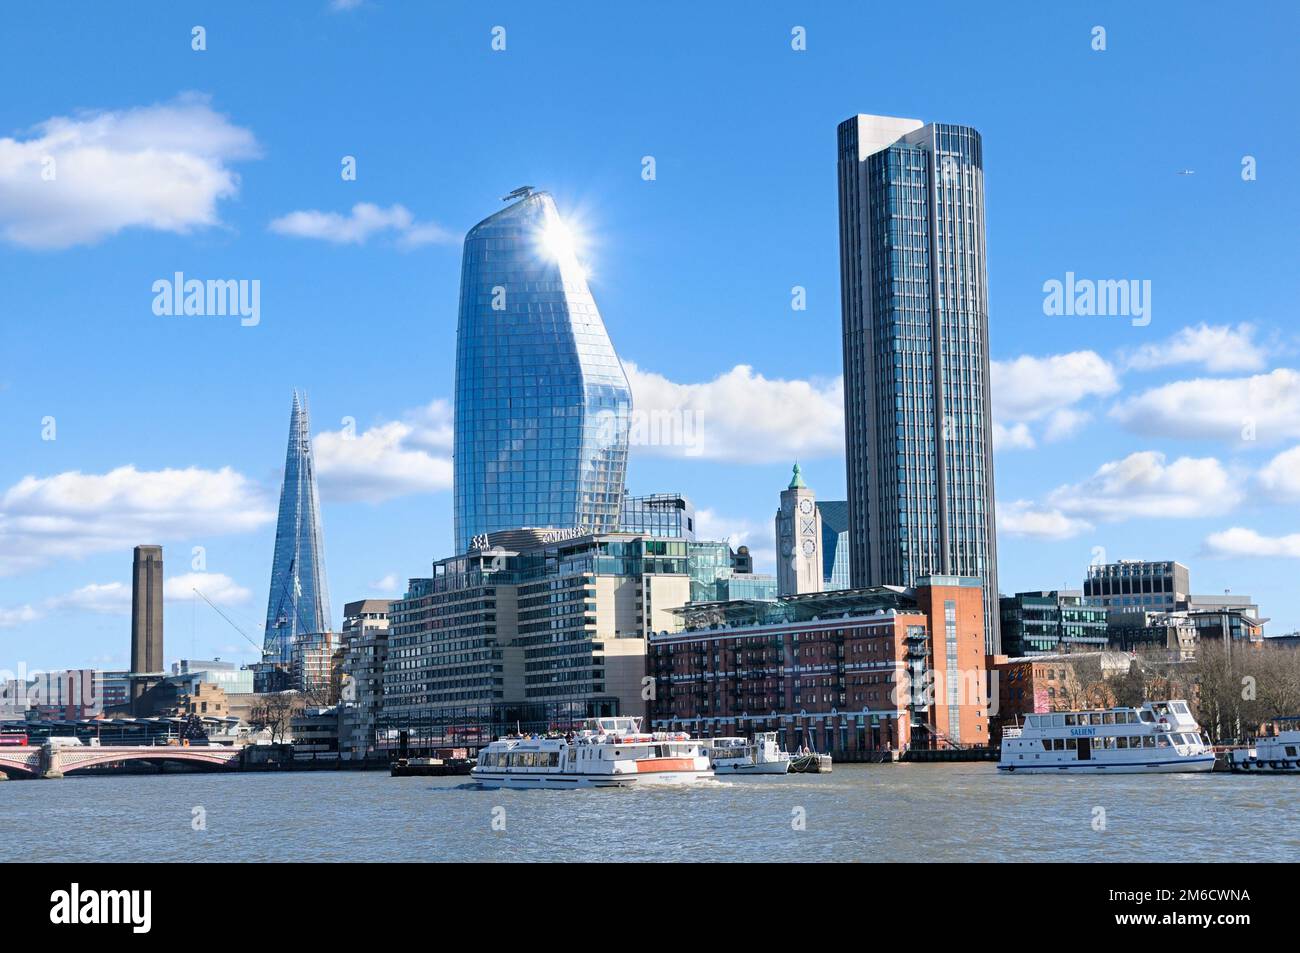 View across river Thames from Victoria Embankment of London skyline with skyscrapers - The Shard, One Blackfriars and South Bank Tower, England, UK Stock Photo